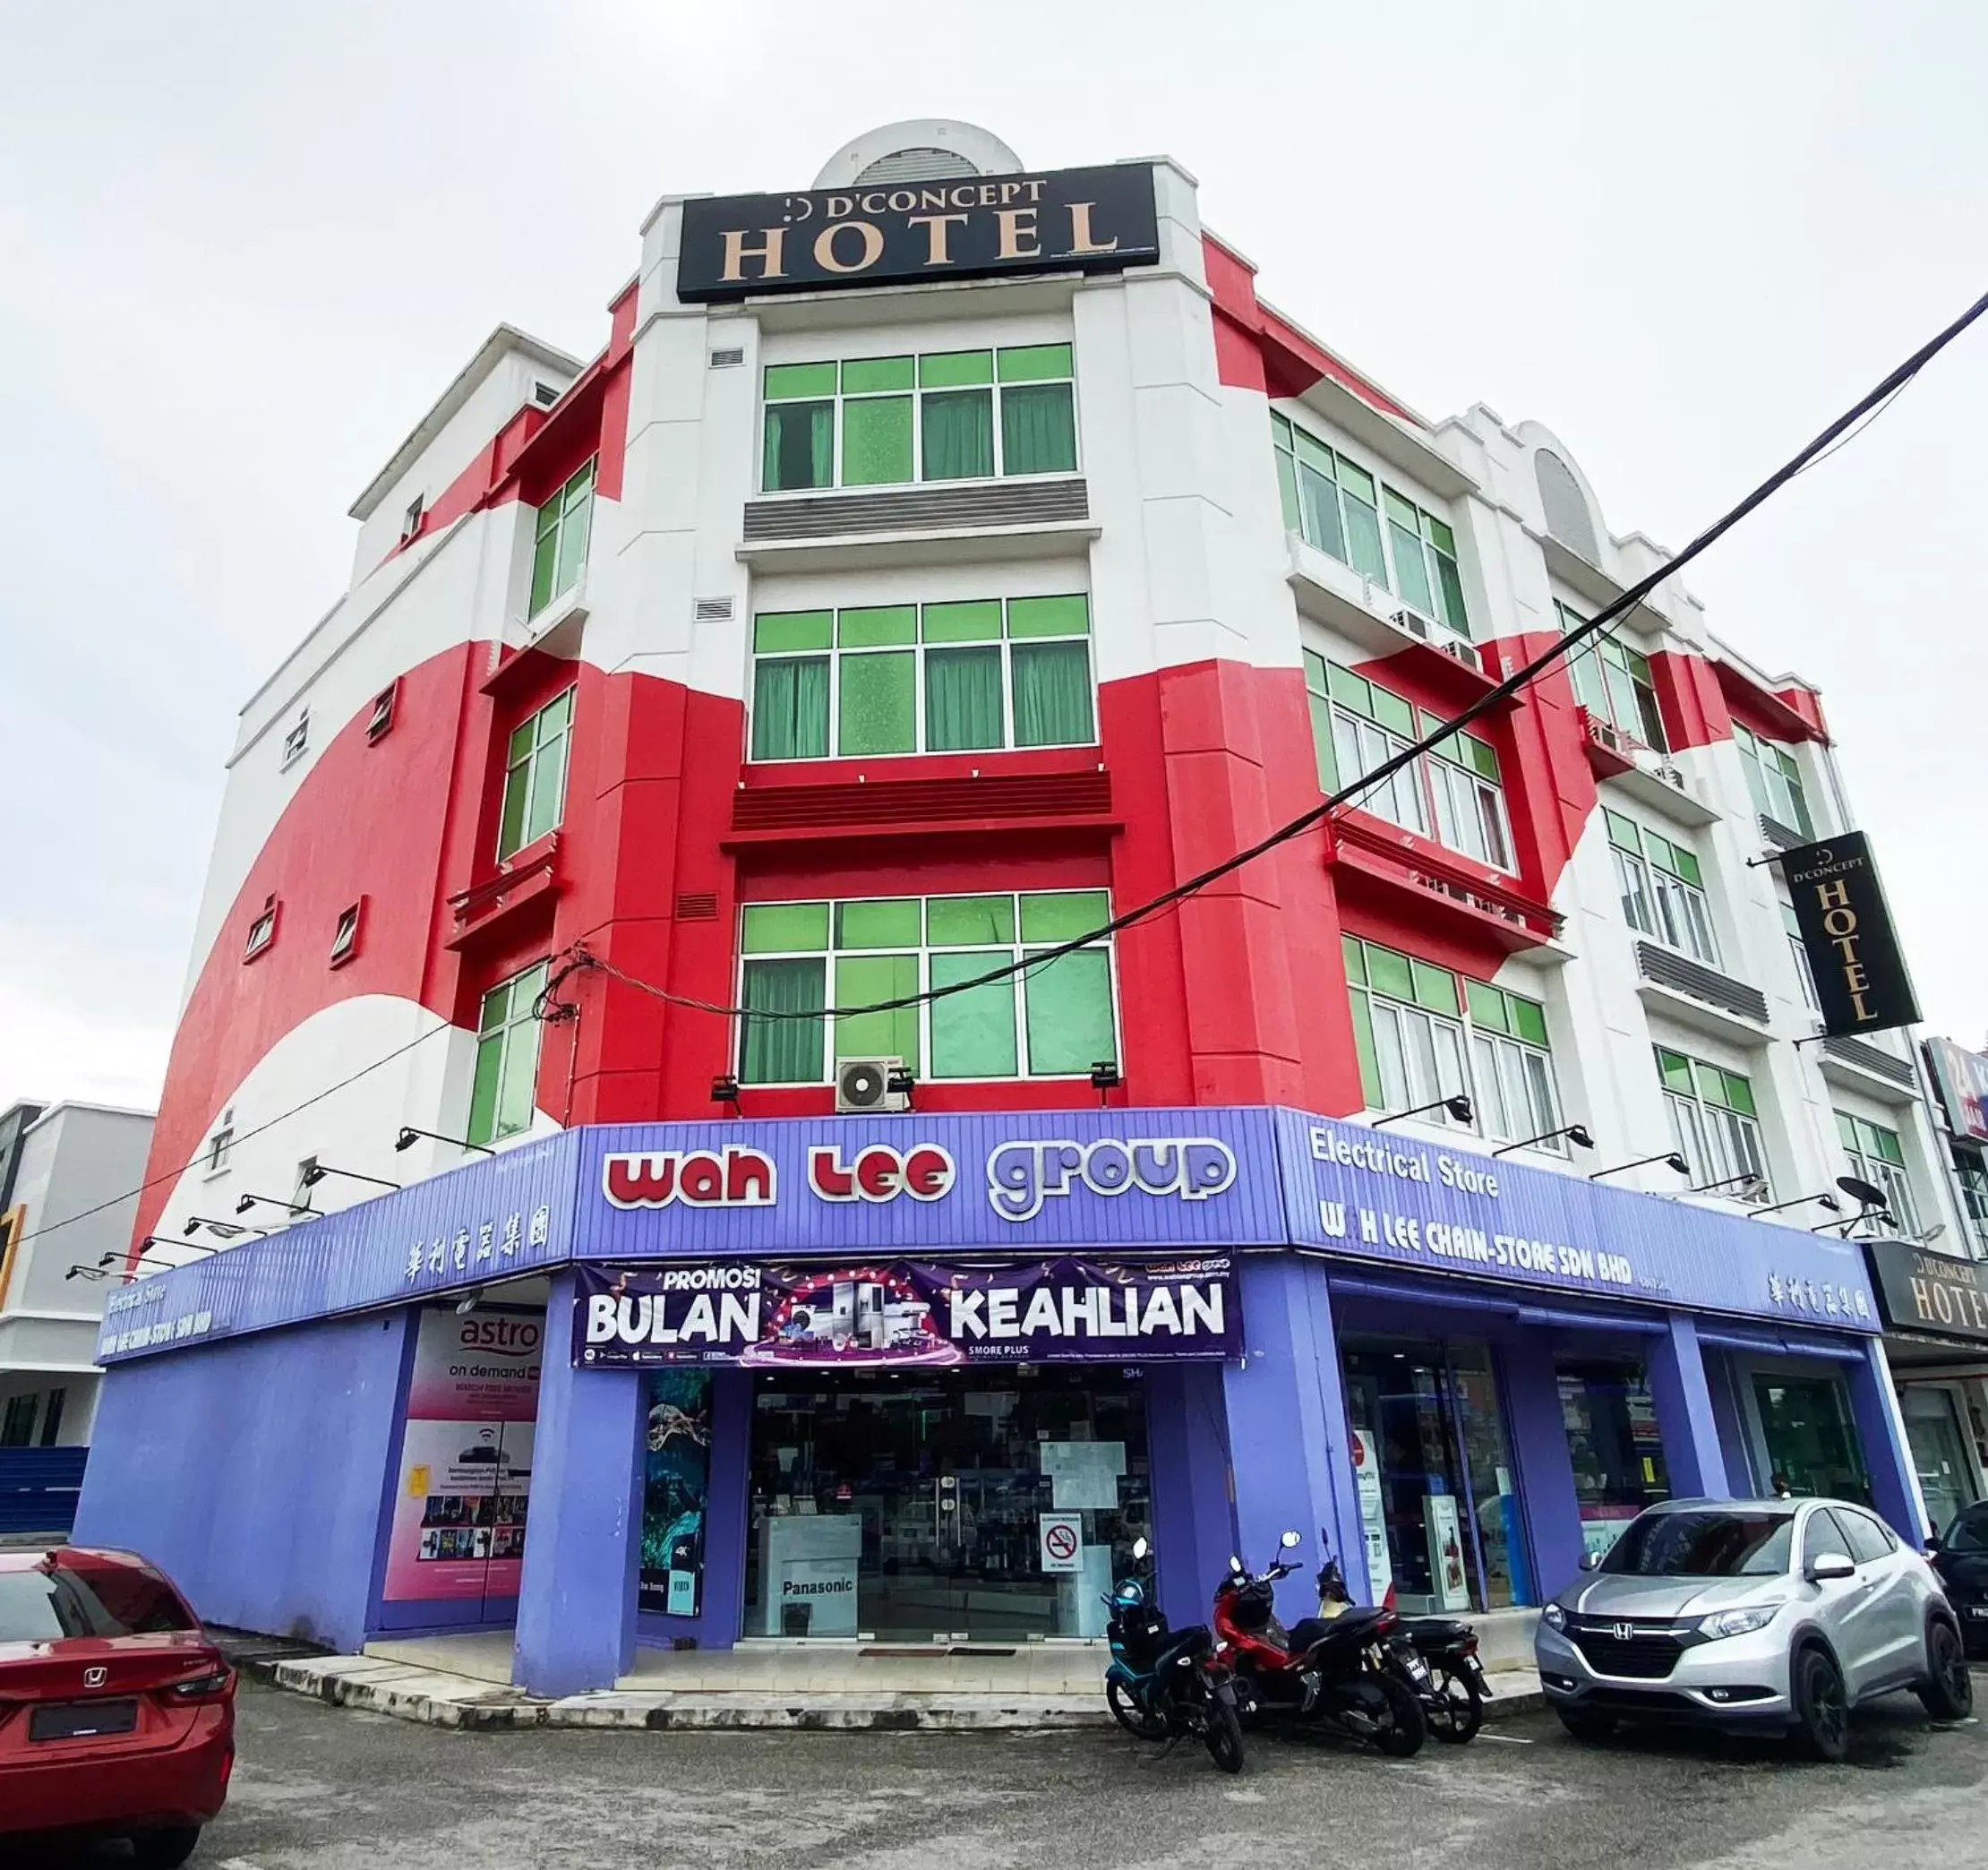 Property Building in D'concept Hotel Kulim